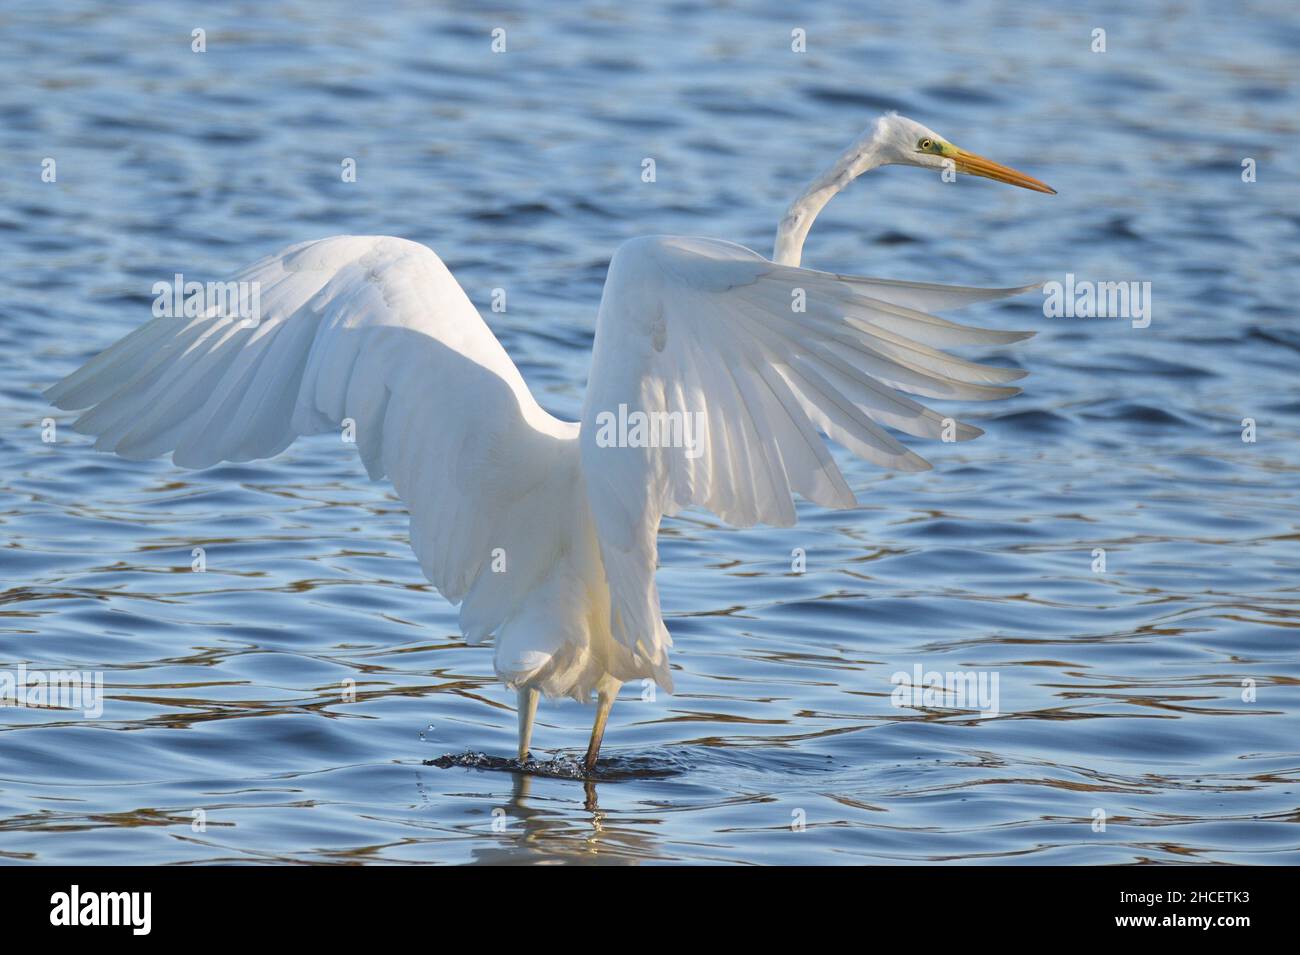 Great Egret flapping its large wings for balance while trying to catch fish in the shallows of a lake. Hertfordshire, England, UK. Stock Photo